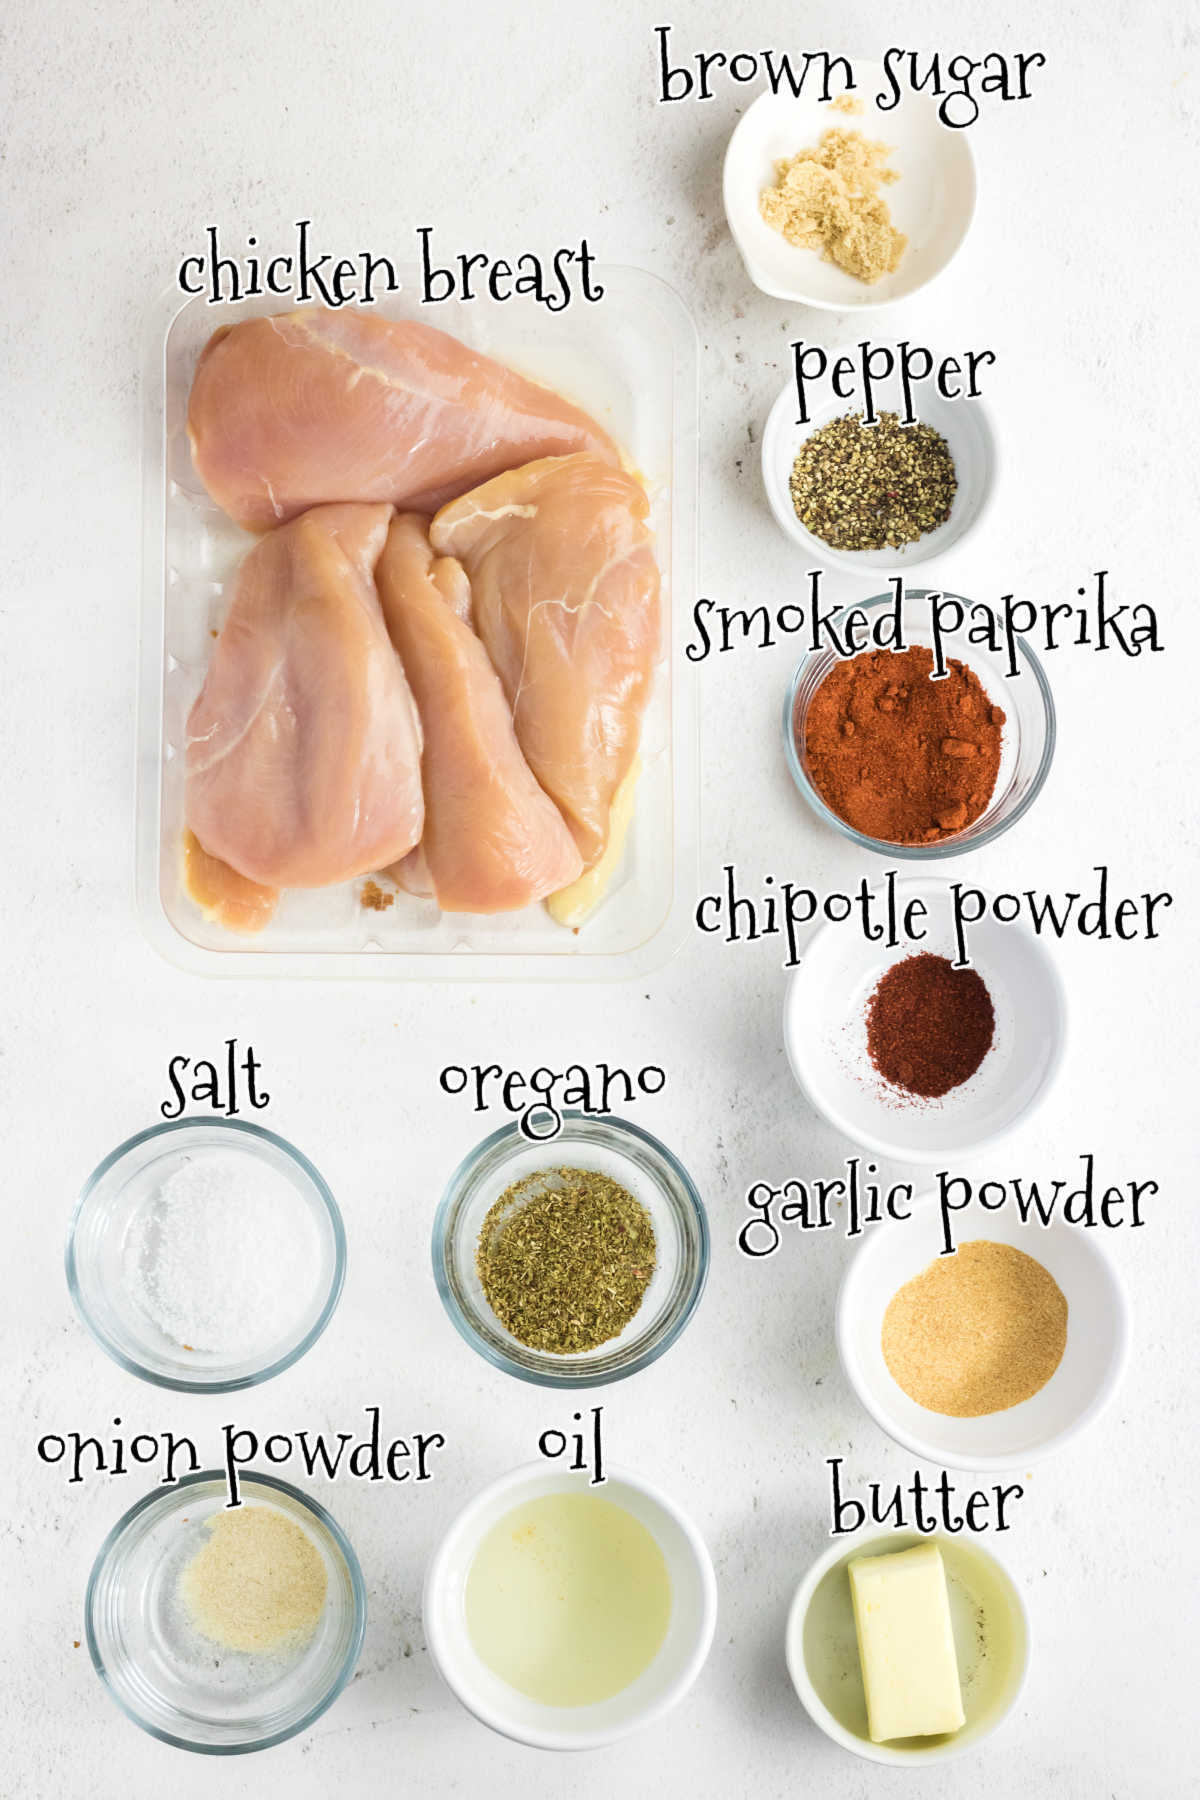 Labeled ingredients for blackened chicken.